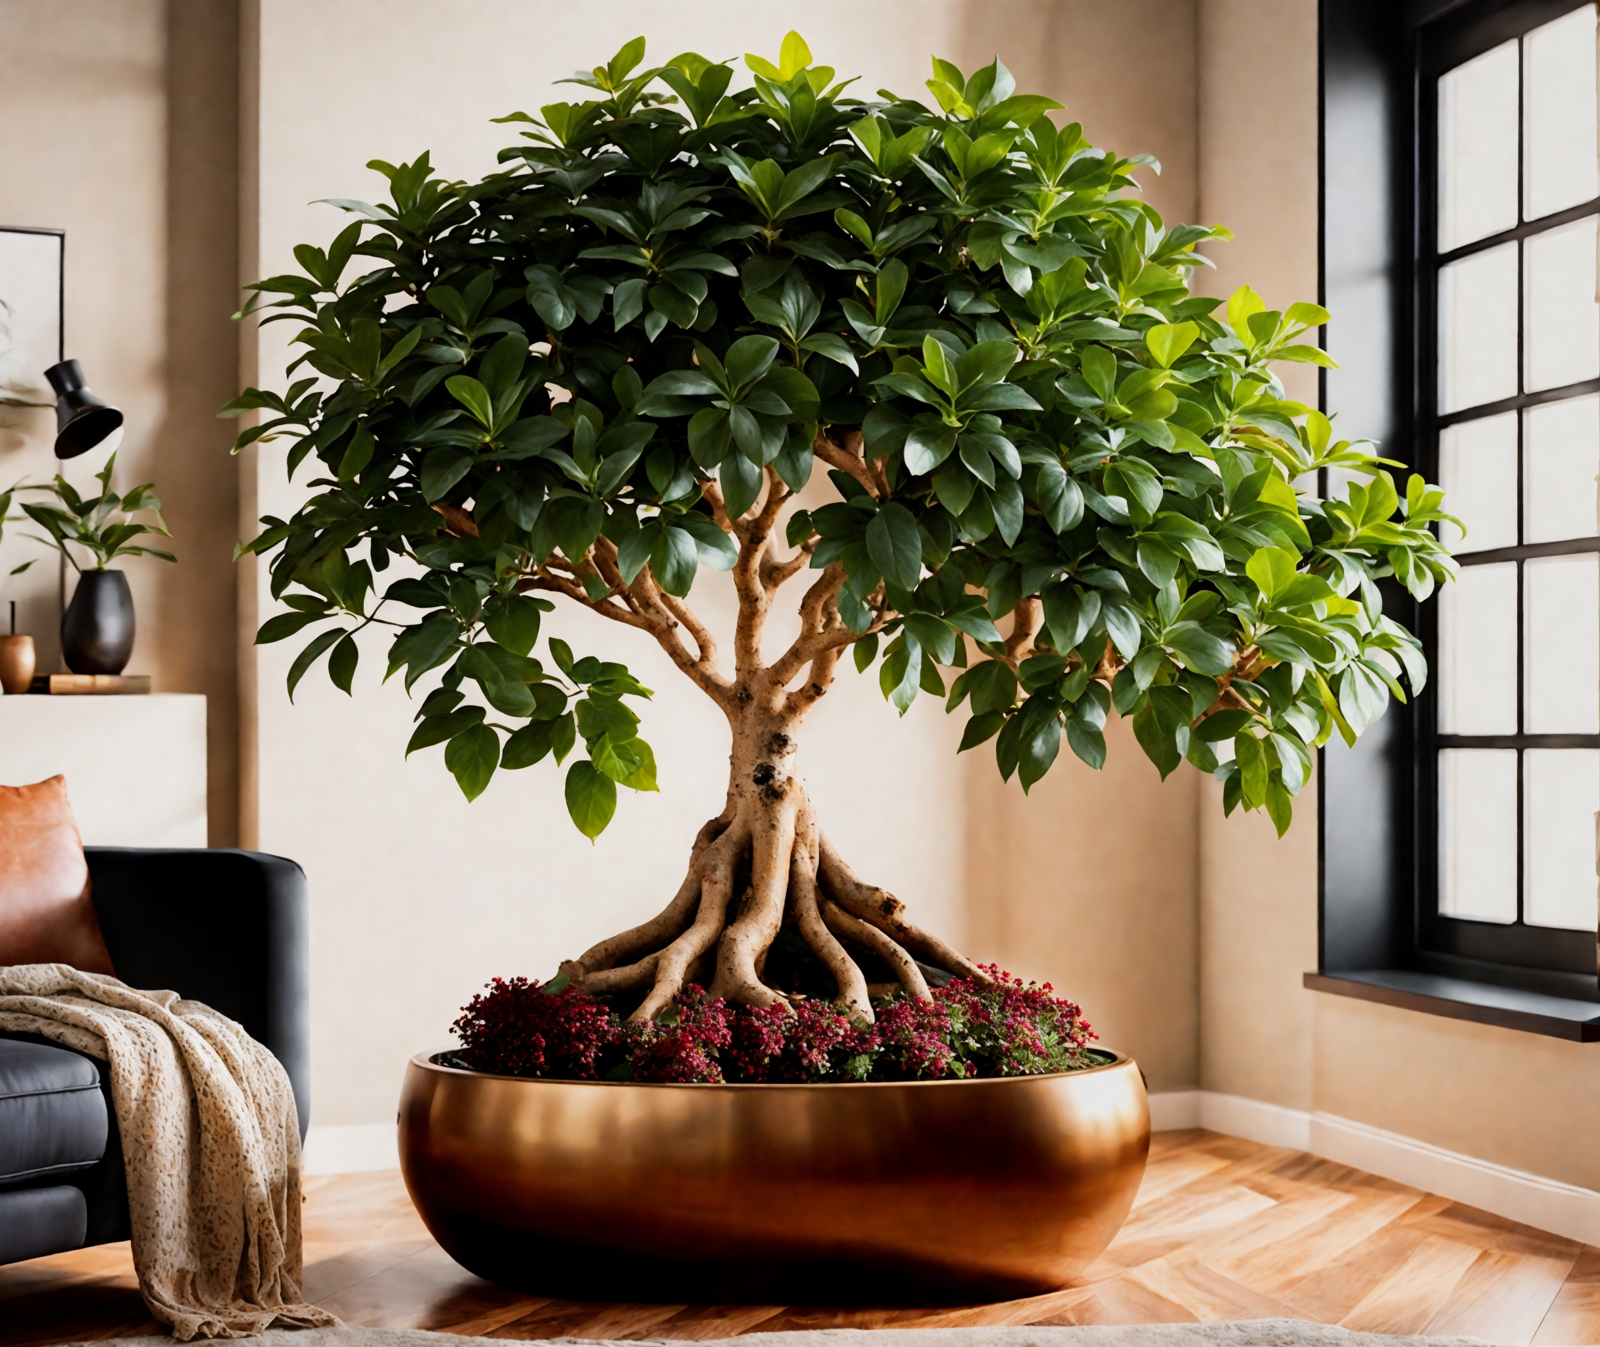 Ficus microcarpa in a planter, with neutral decor and clear lighting.